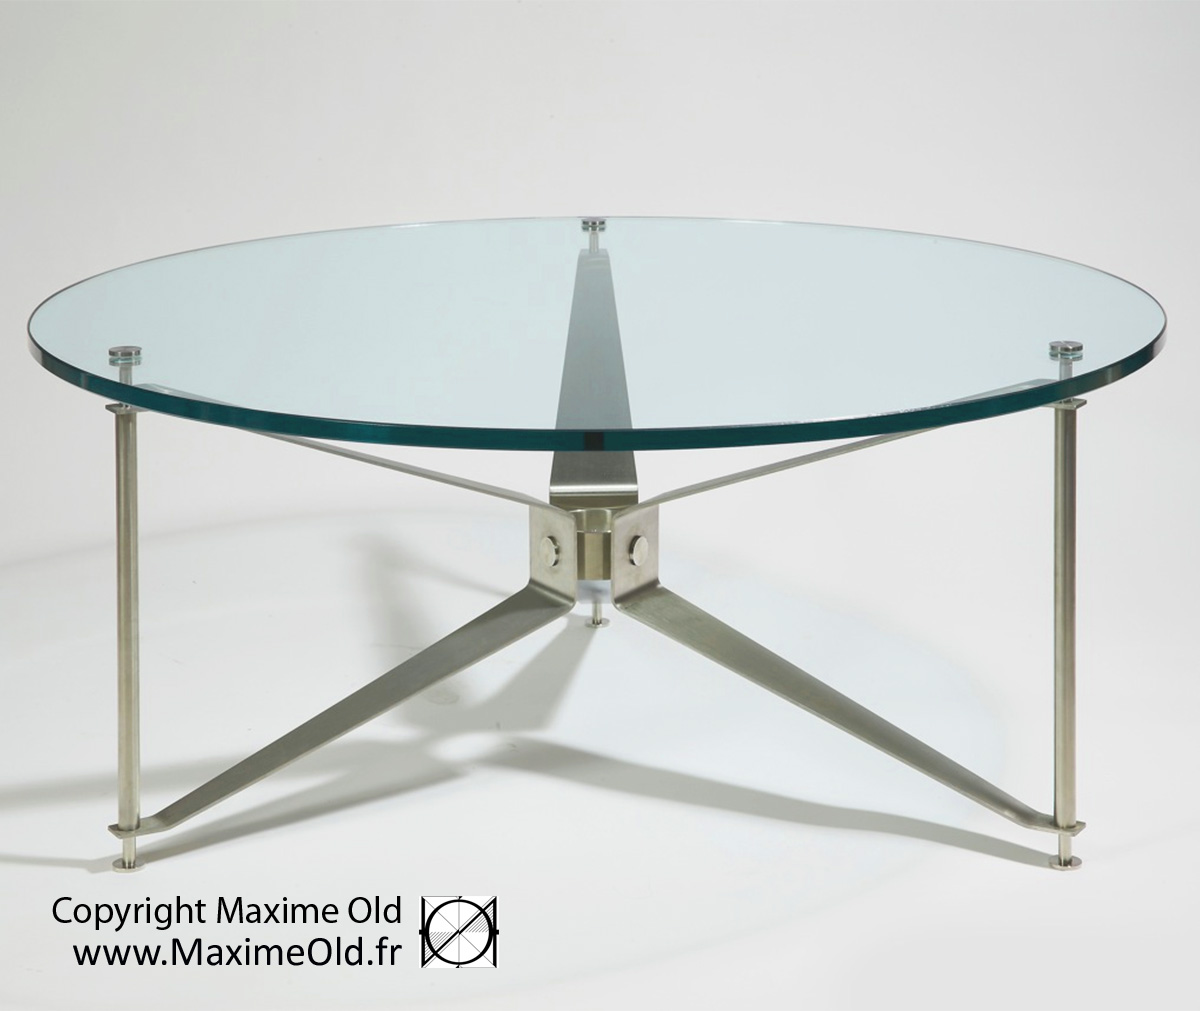 Coffee-Side Tables: Maxime Old Paquebot France Propeller Table